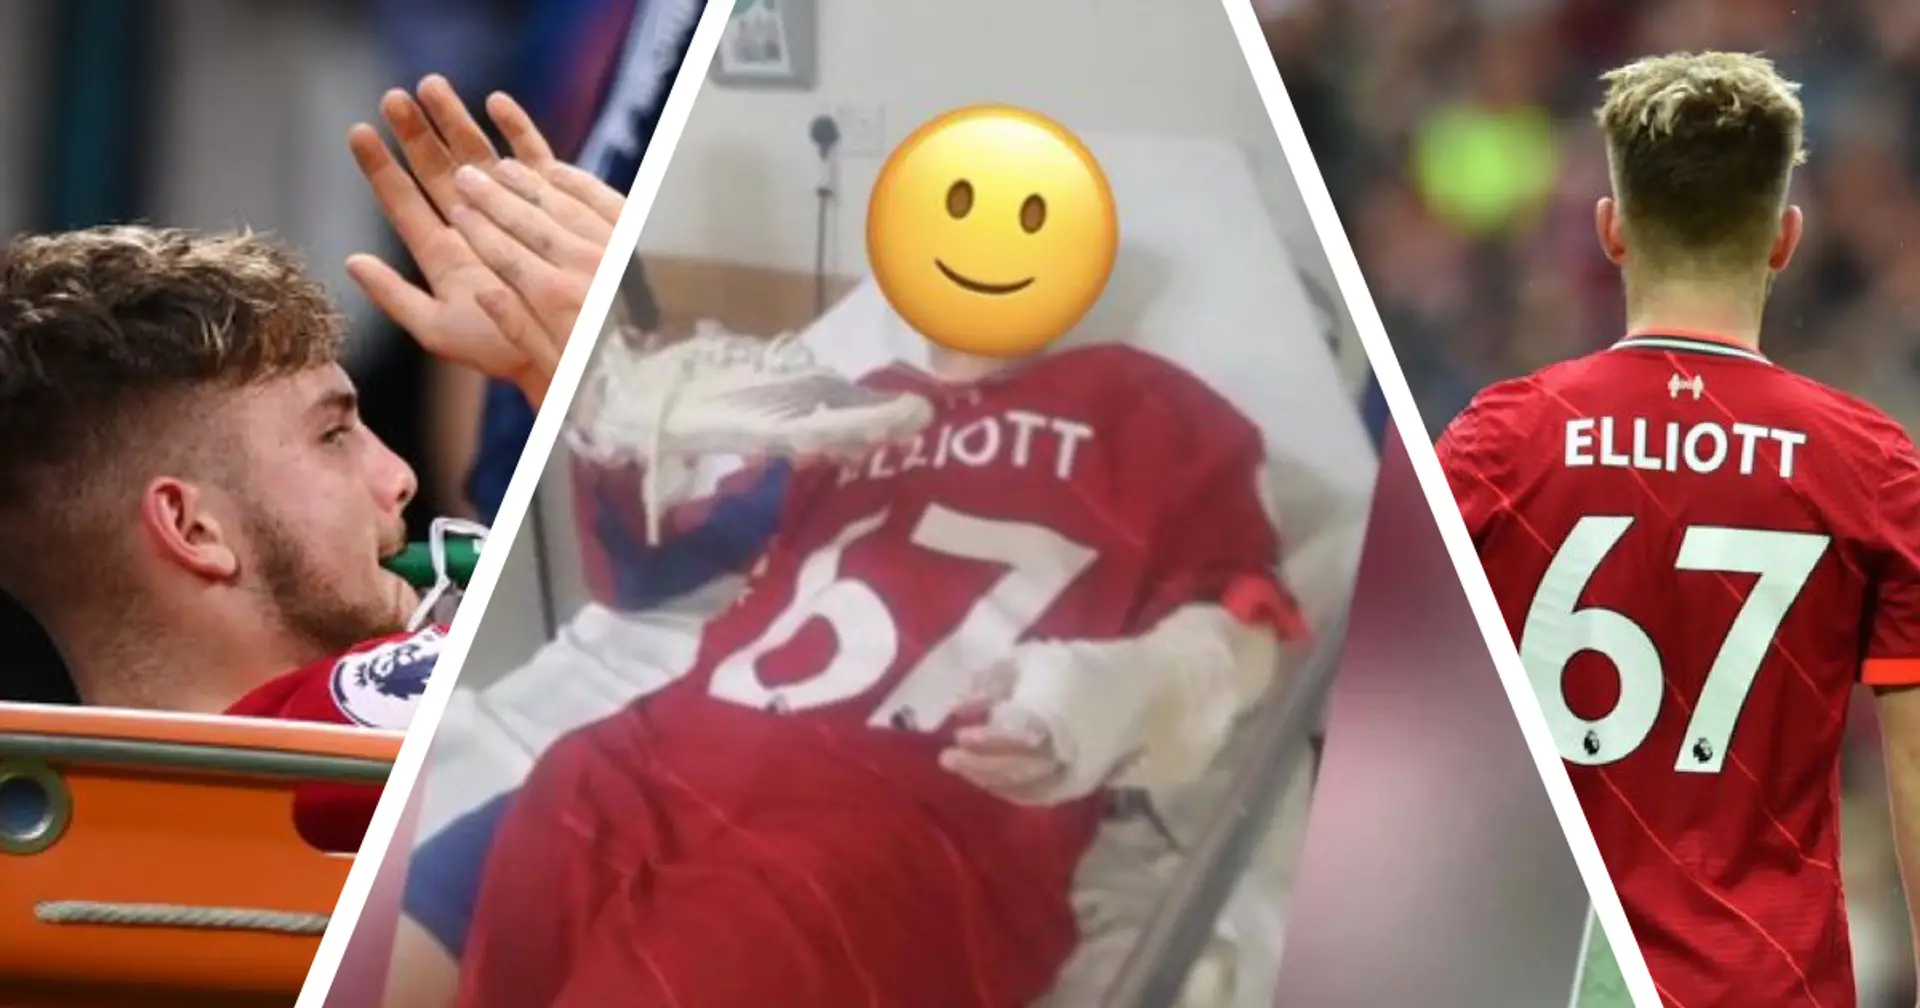 'My son's buzzing': Elliott's brilliant gesture to fan in hospital after injury shows youngster's class